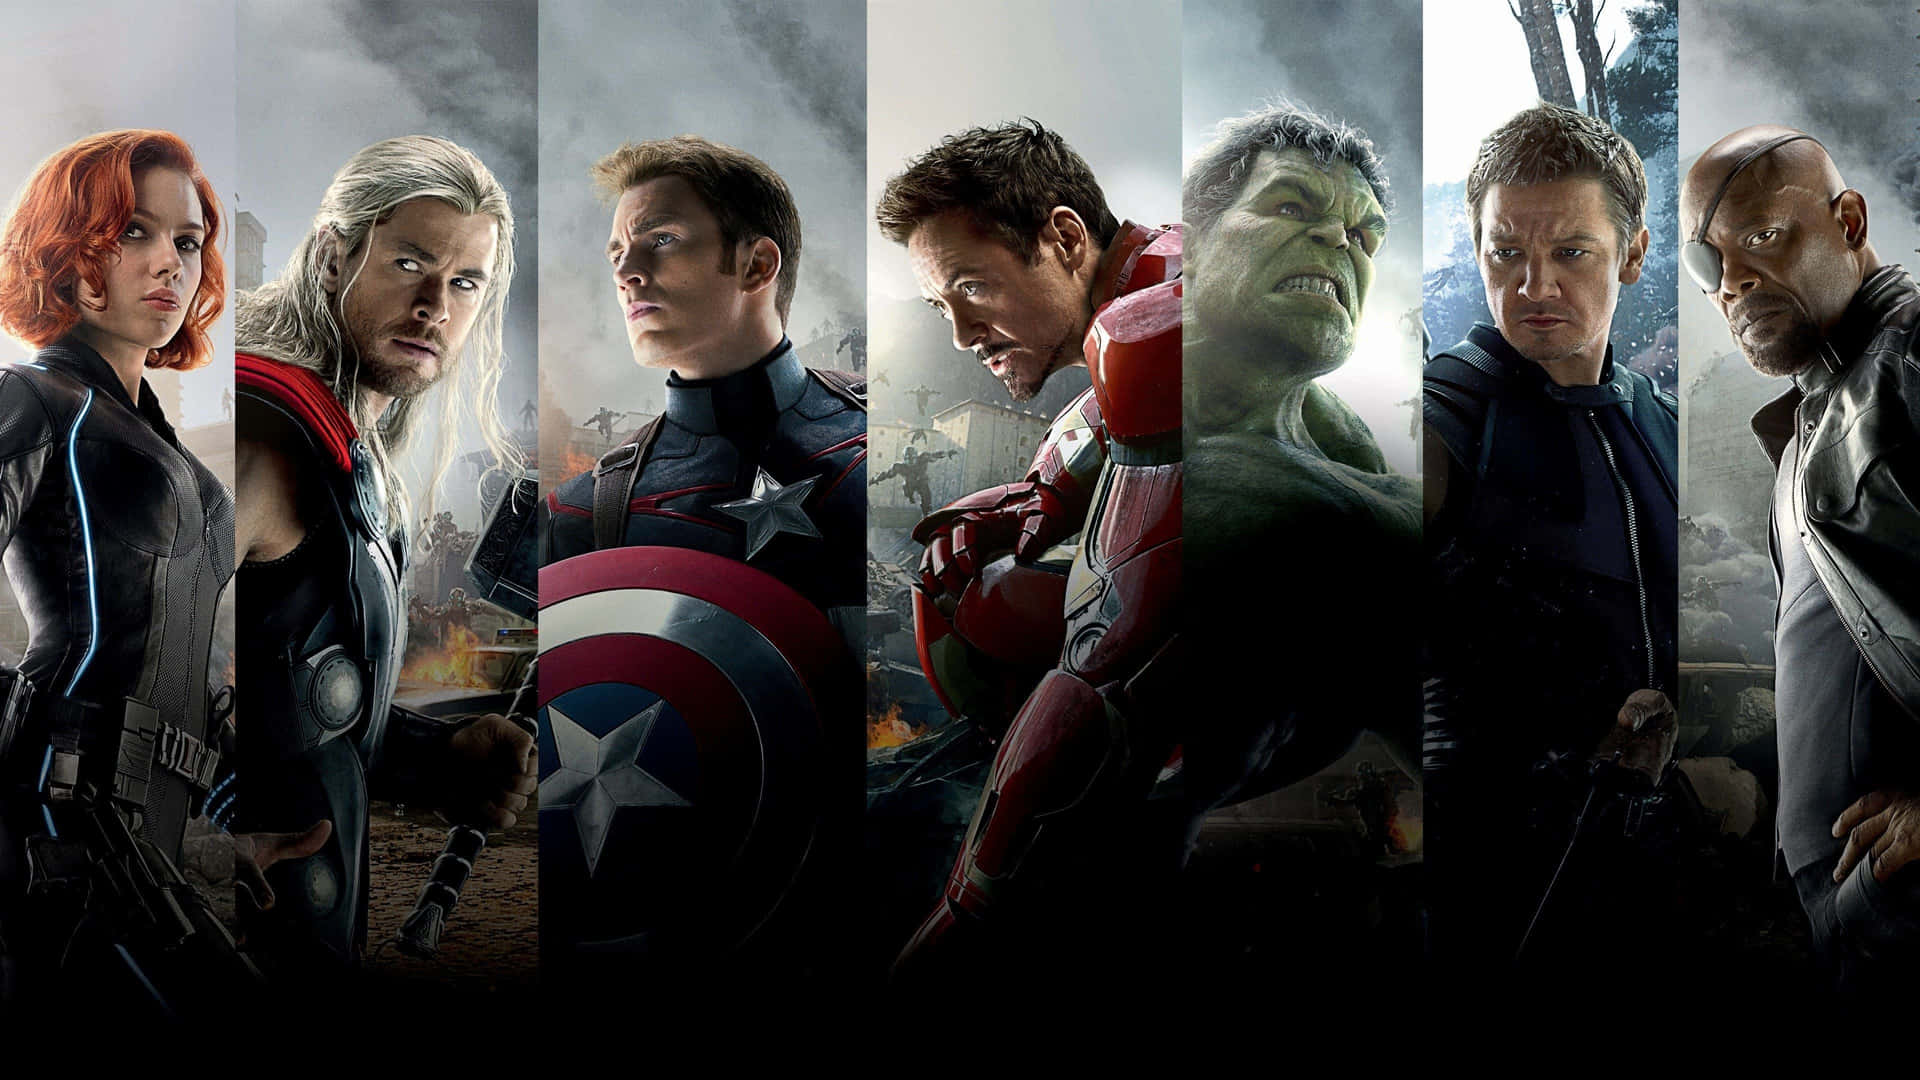 Personalize Your Laptop with this Avengers Theme Wallpaper